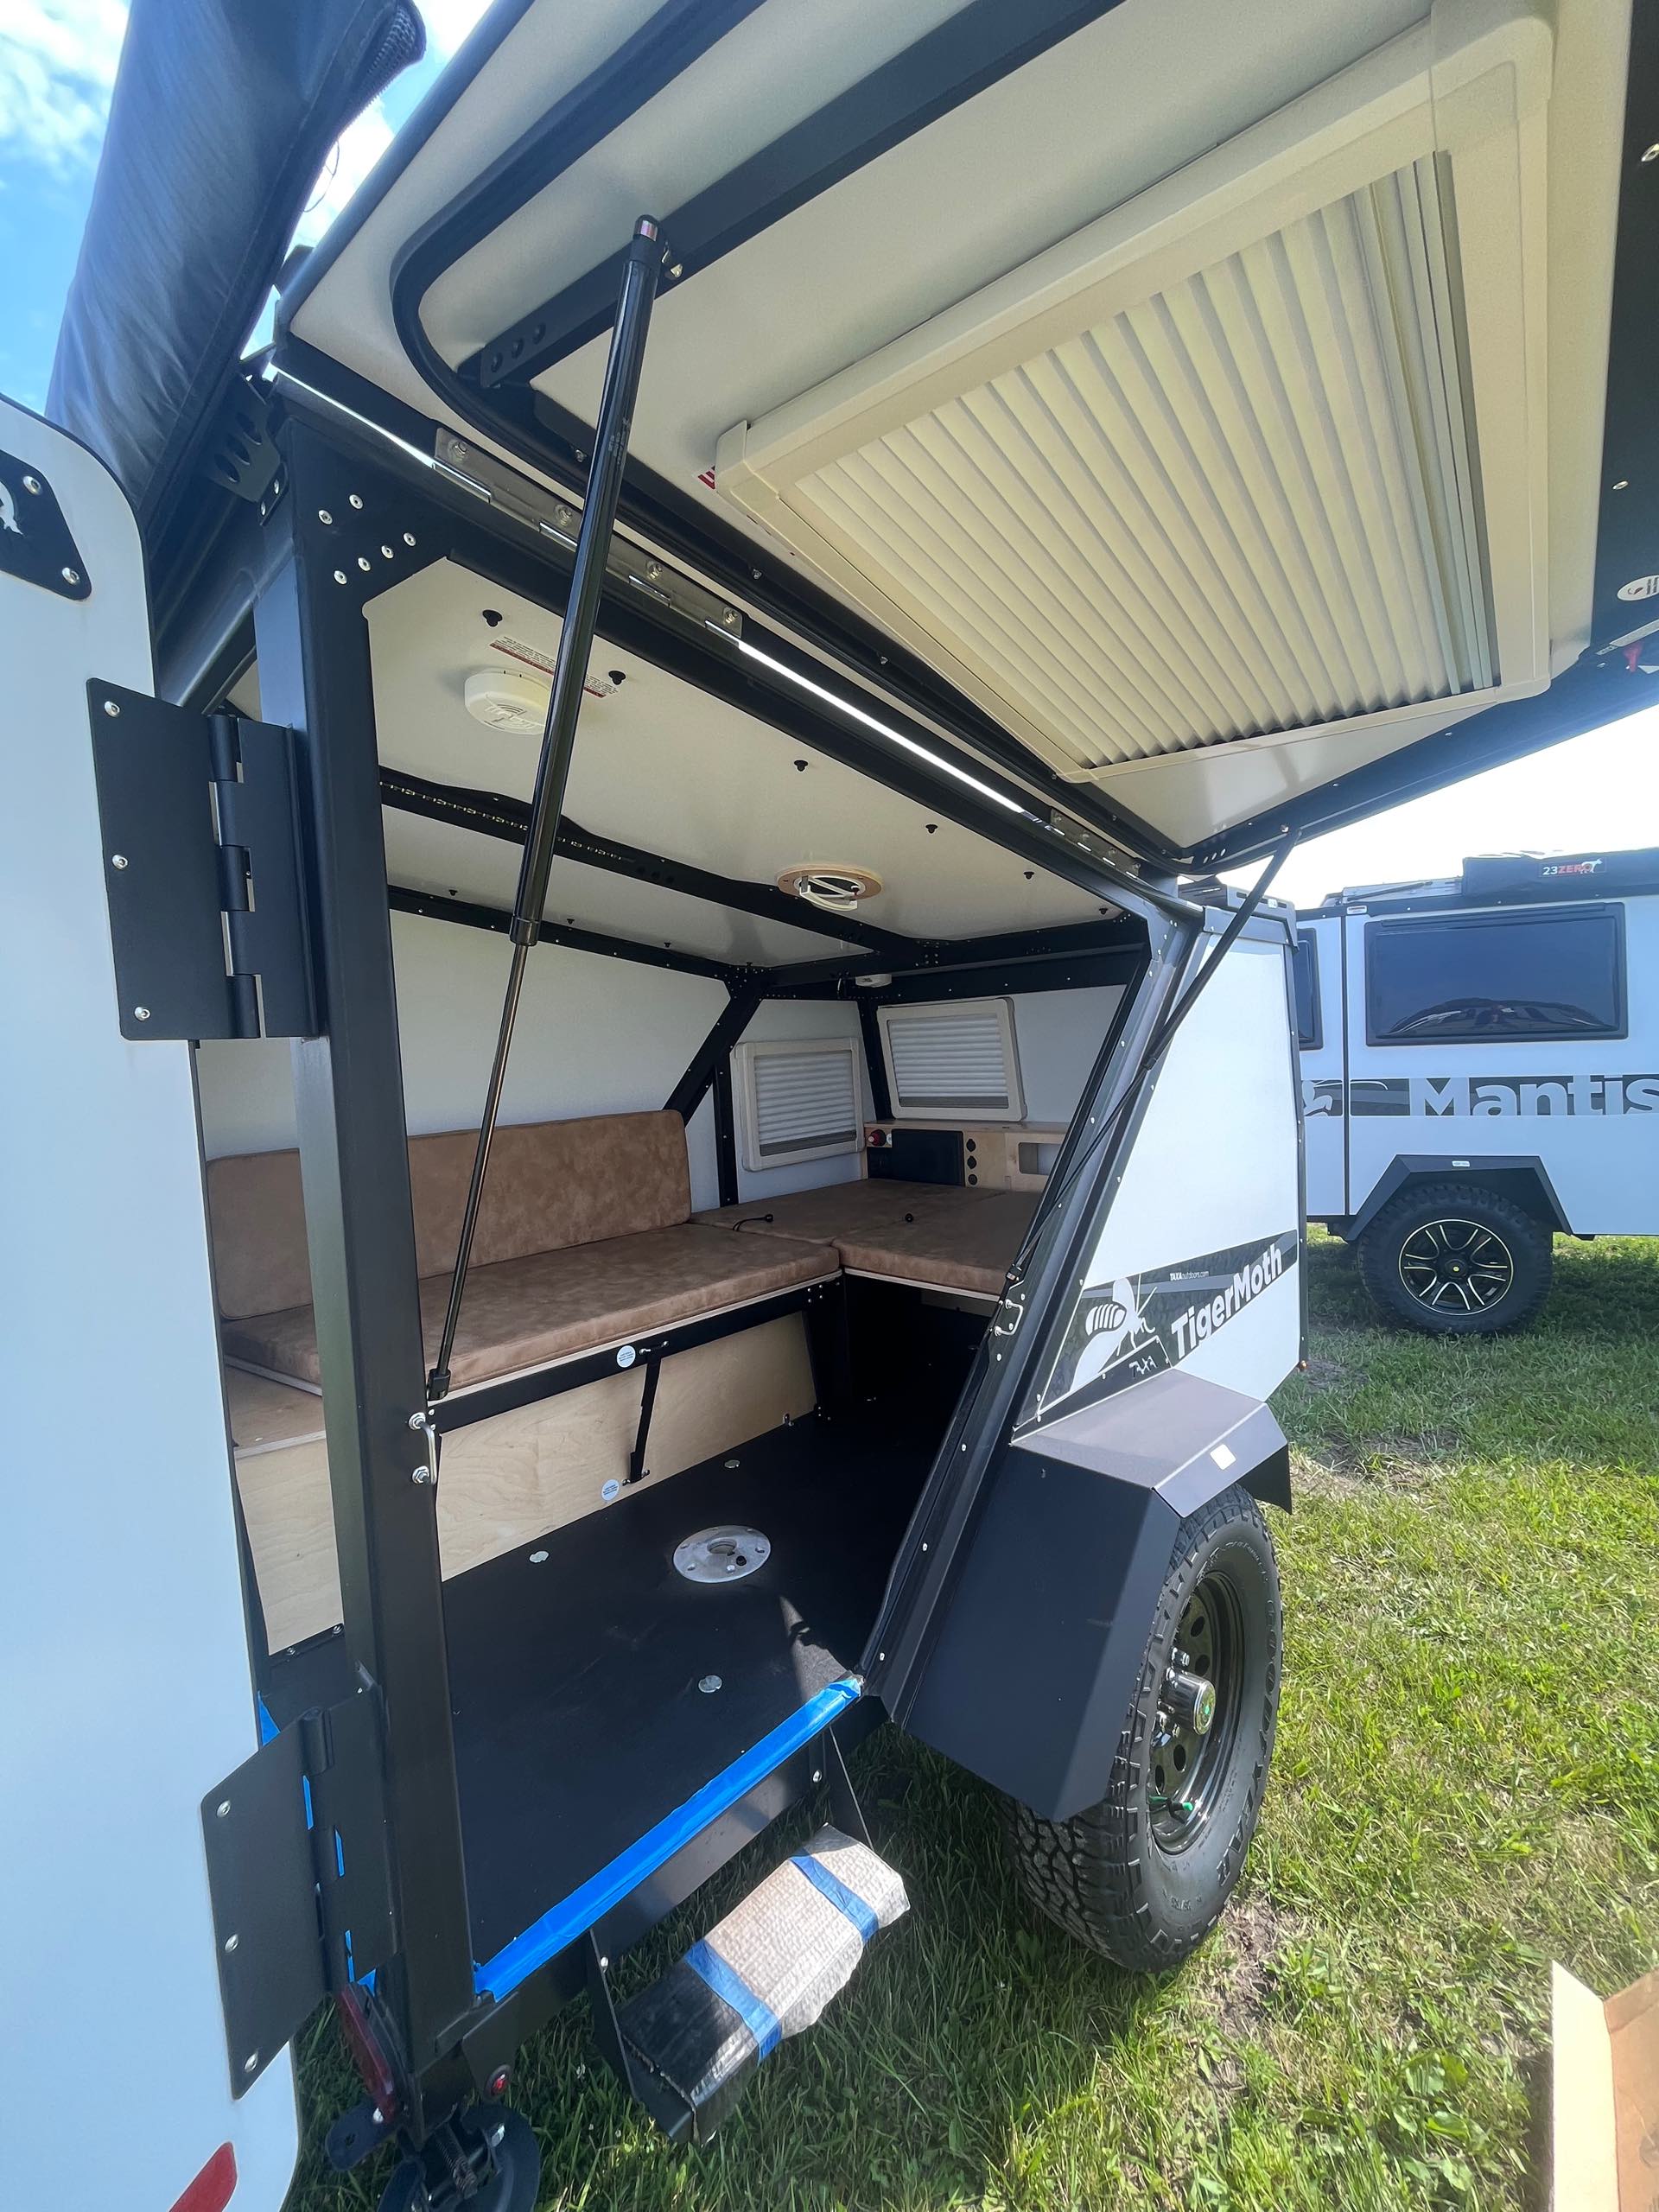 2023 TAXA OUTDOORS TigerMoth at Prosser's Premium RV Outlet